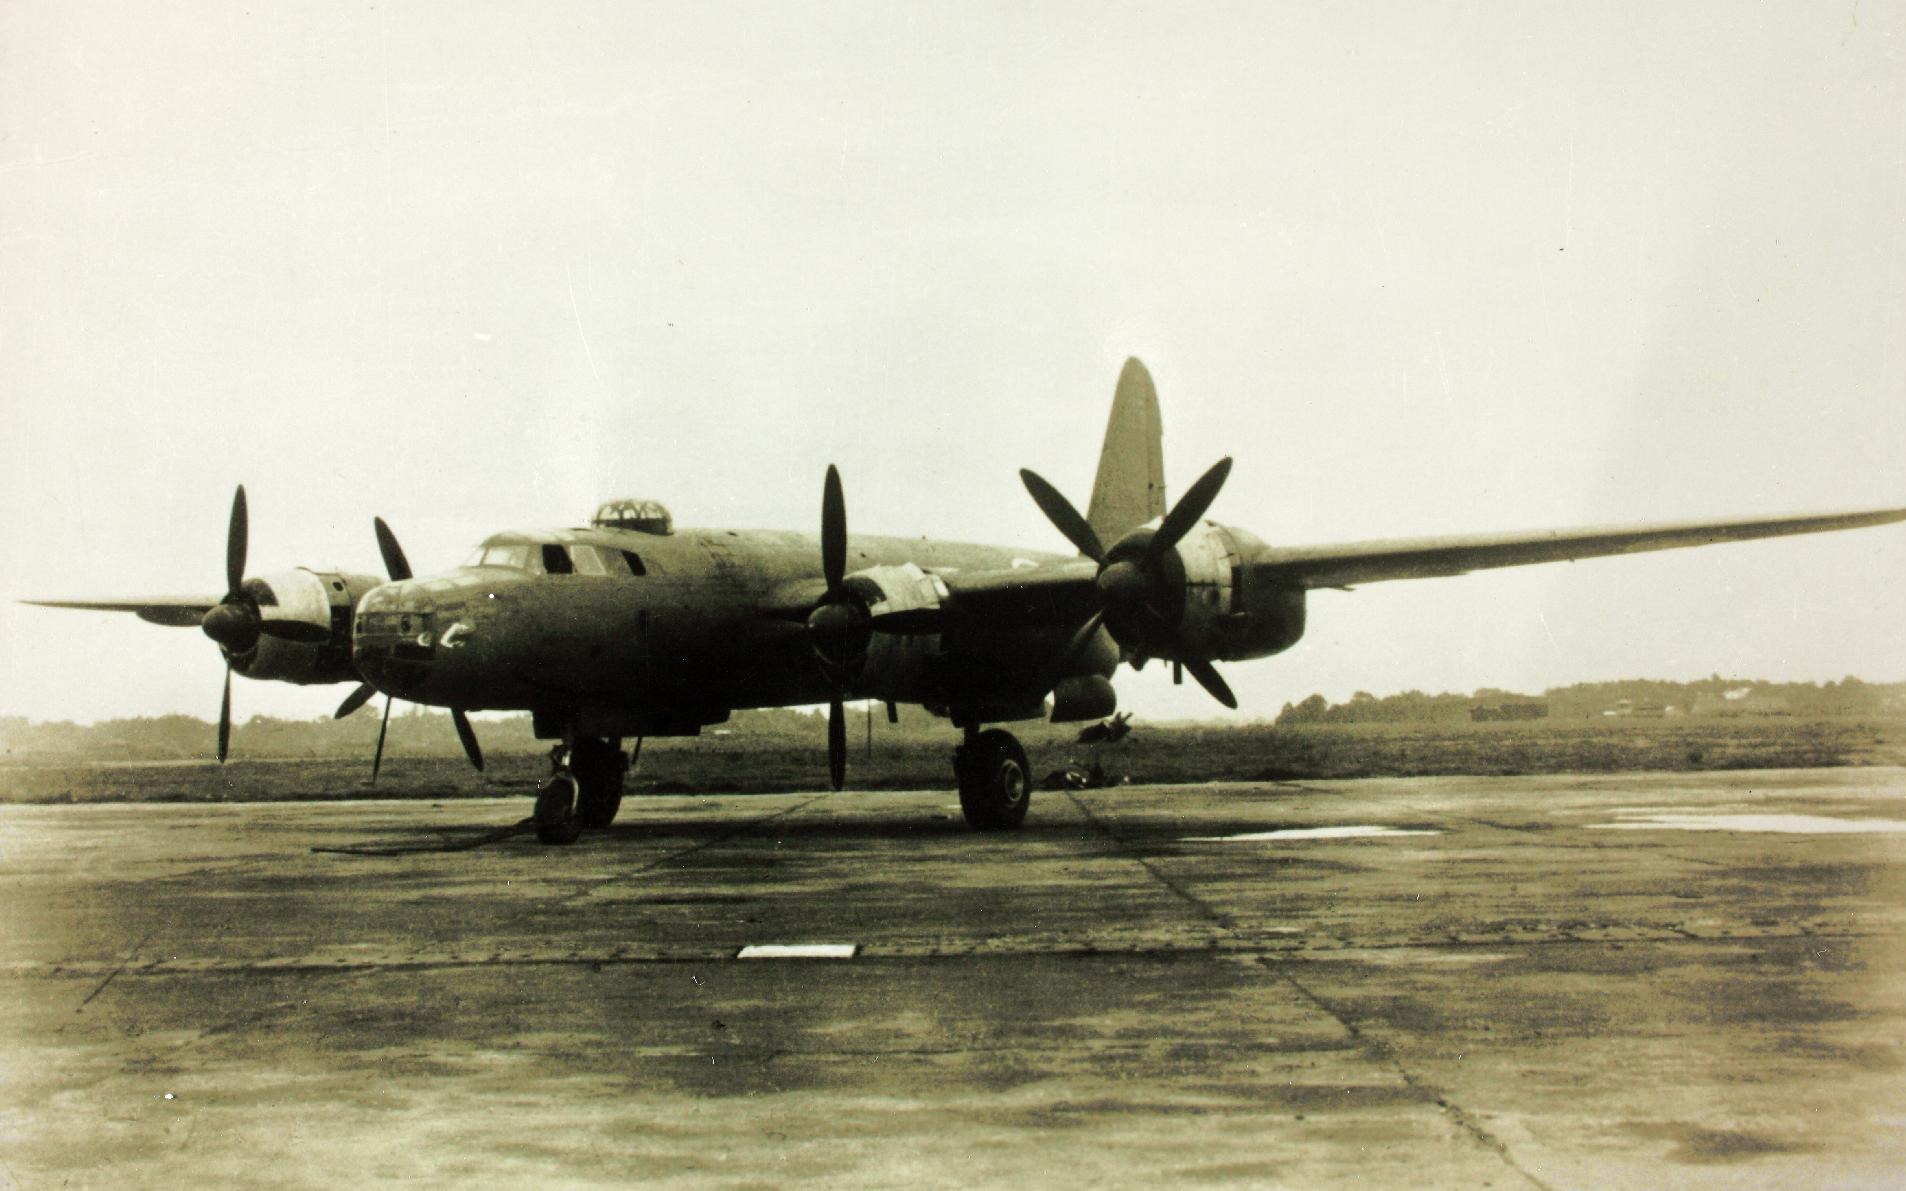 Wow: Japan Tried To Build Its Own Long-Range Bomber During World War Ii |  The National Interest